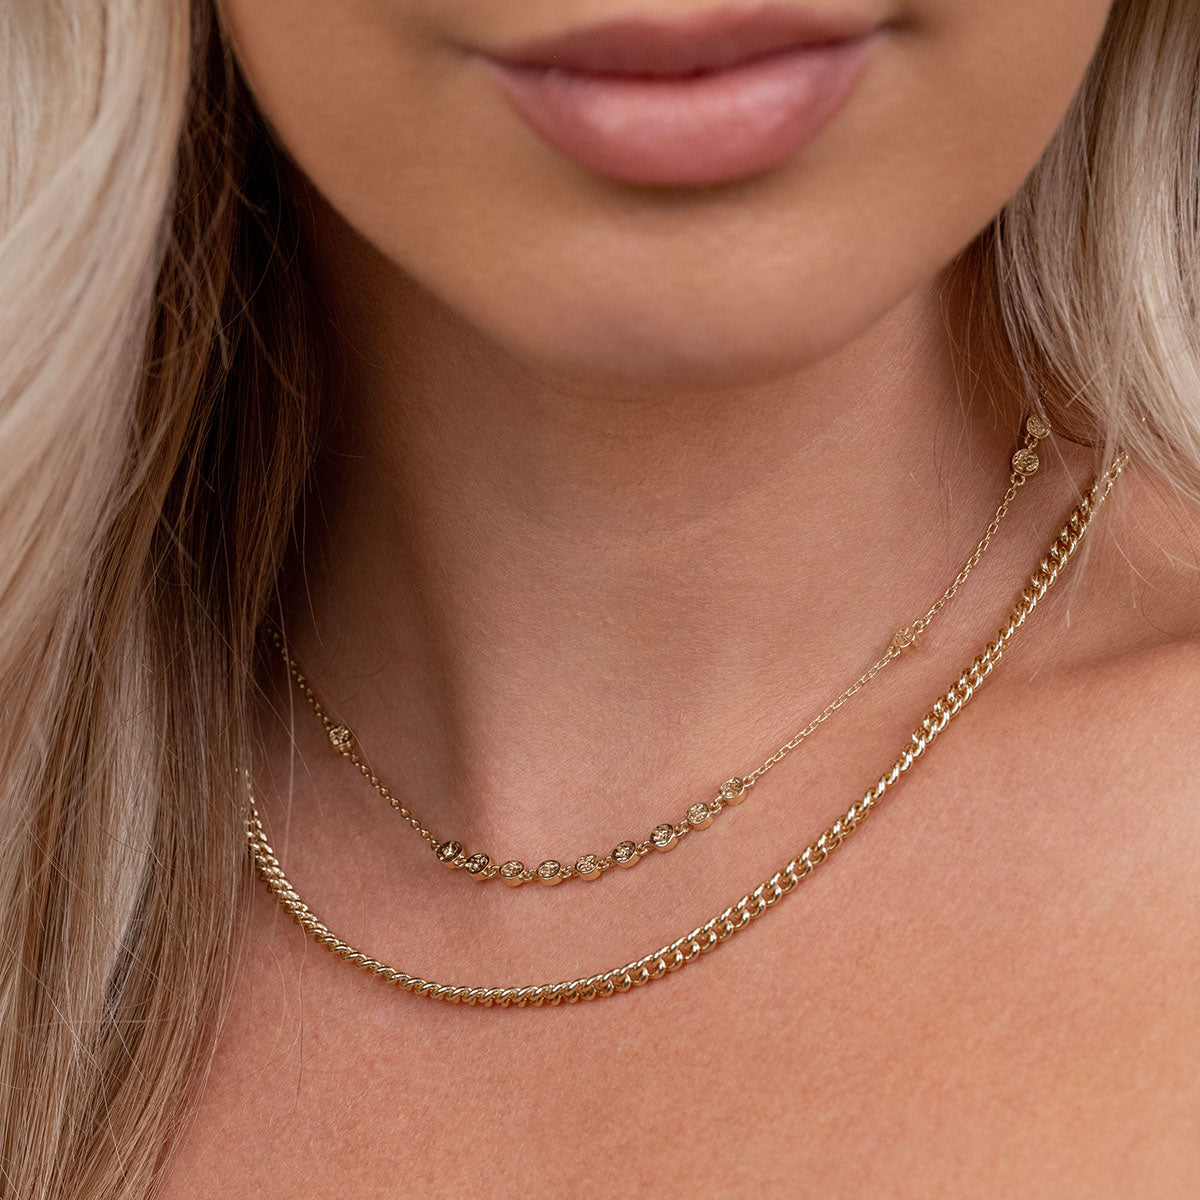 Layered gold chain necklaces